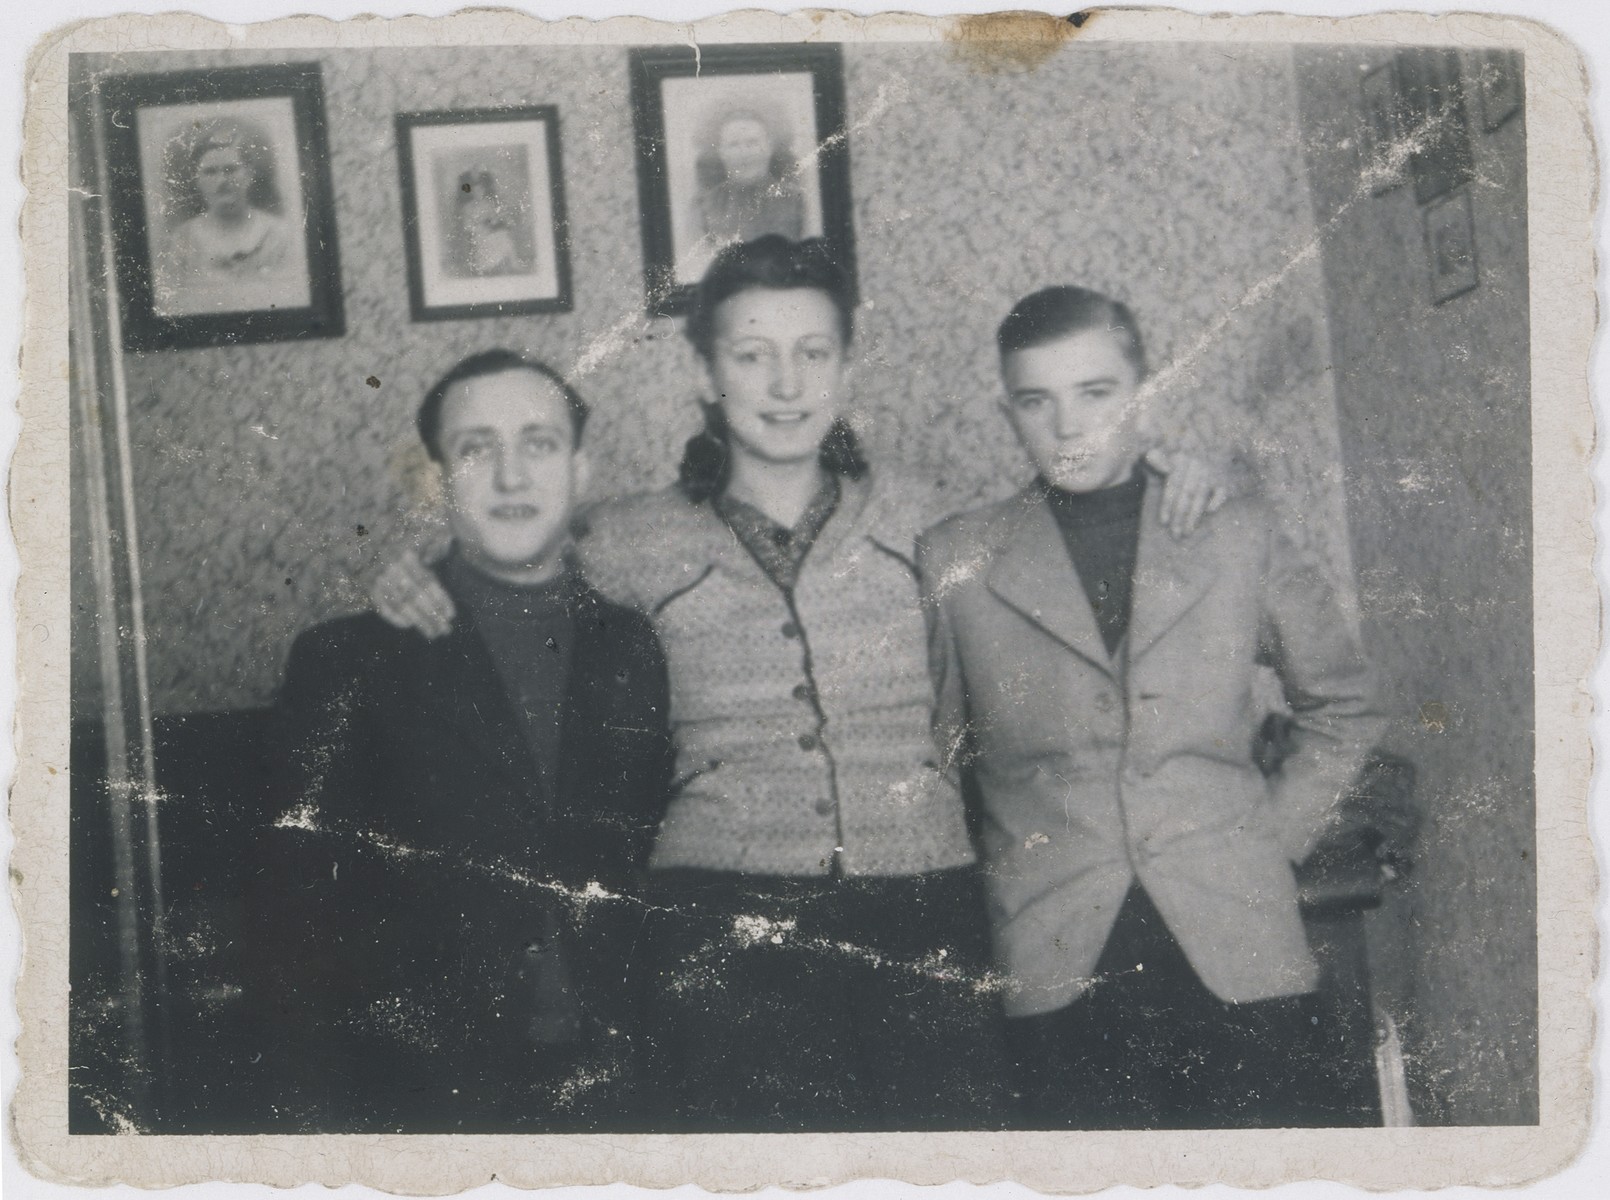 Jan Kostanski (right) poses with Fela Wierzbicka and her husband Szmulek in the Warsaw ghetto.

Fela was eight months pregnant in this photo.  She was killed shortly thereafter by the Germans and her husband, Szmulek, went mad upon hearing the news.